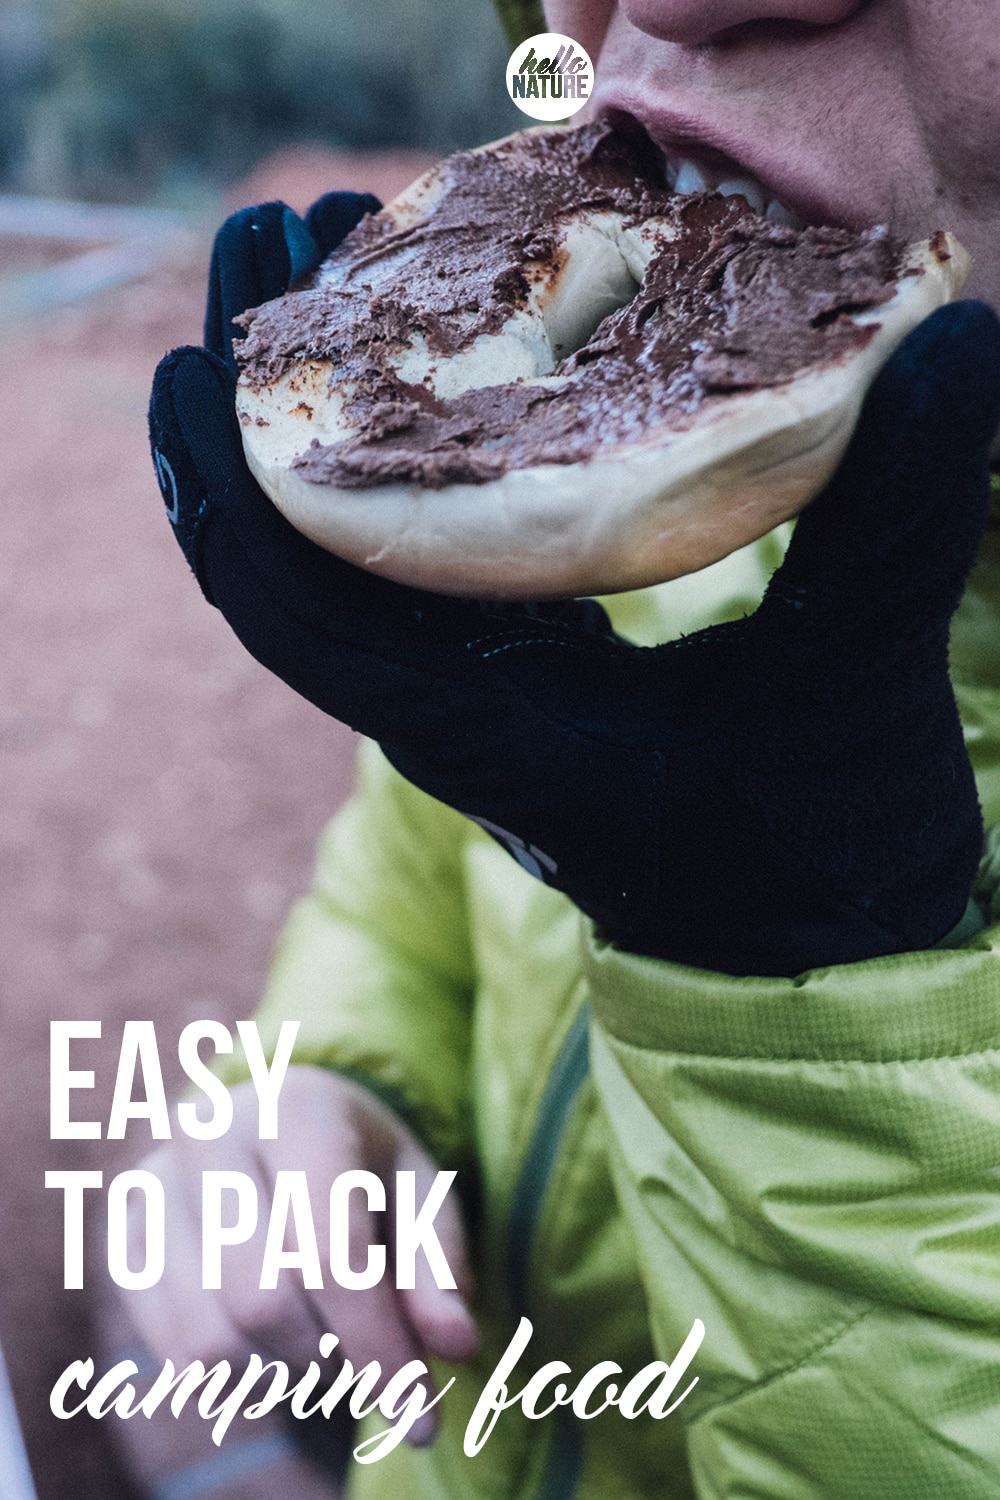 Packing for family camping trips is hard enough. Make your next trip easier with this list of easy camping food your whole family will enjoy.